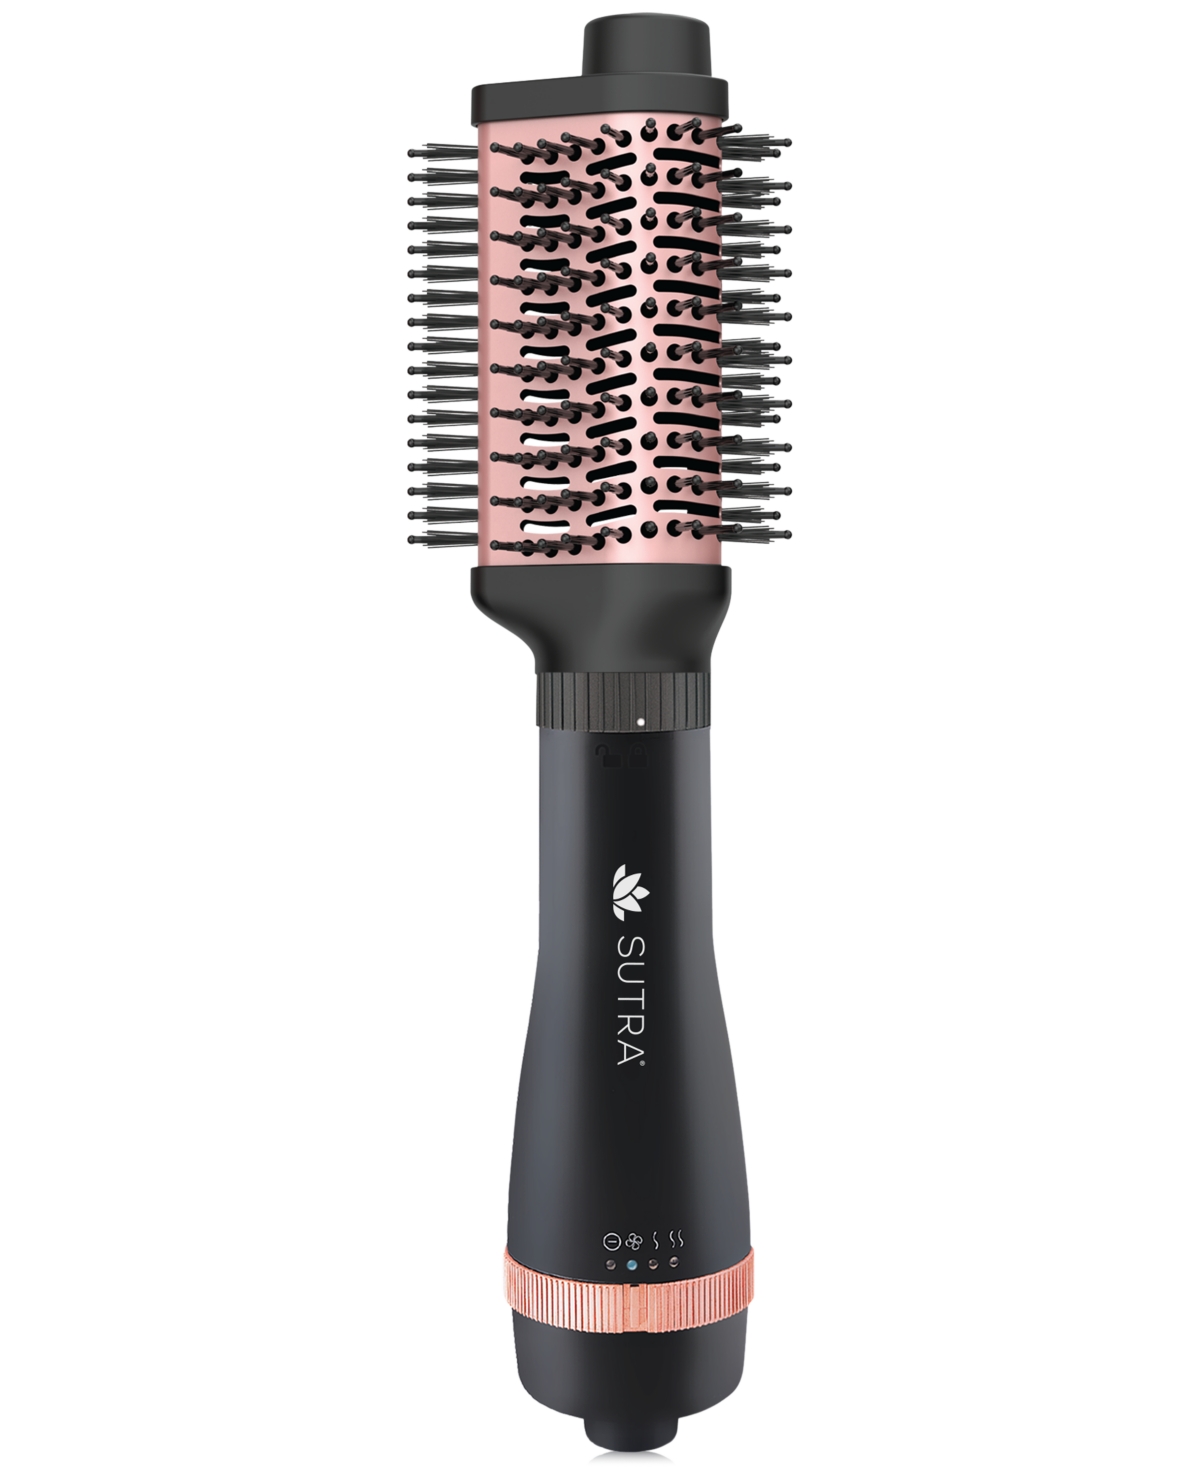 Shop Sutra Beauty 2" V Brush Attachment In Black  Rose Gold